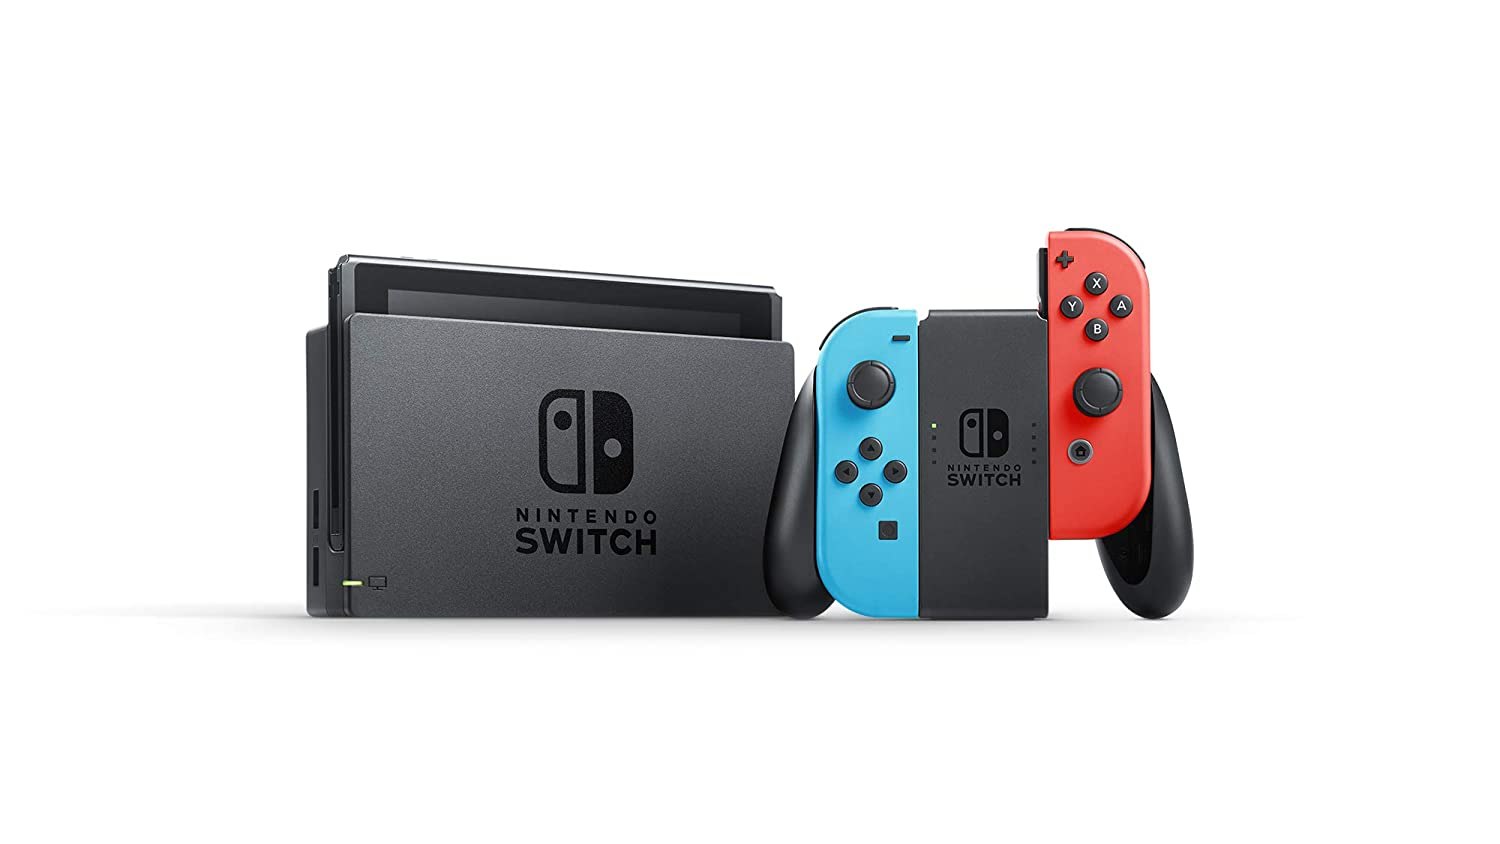 Nintendo Switch with detachable Joy-Con controllers